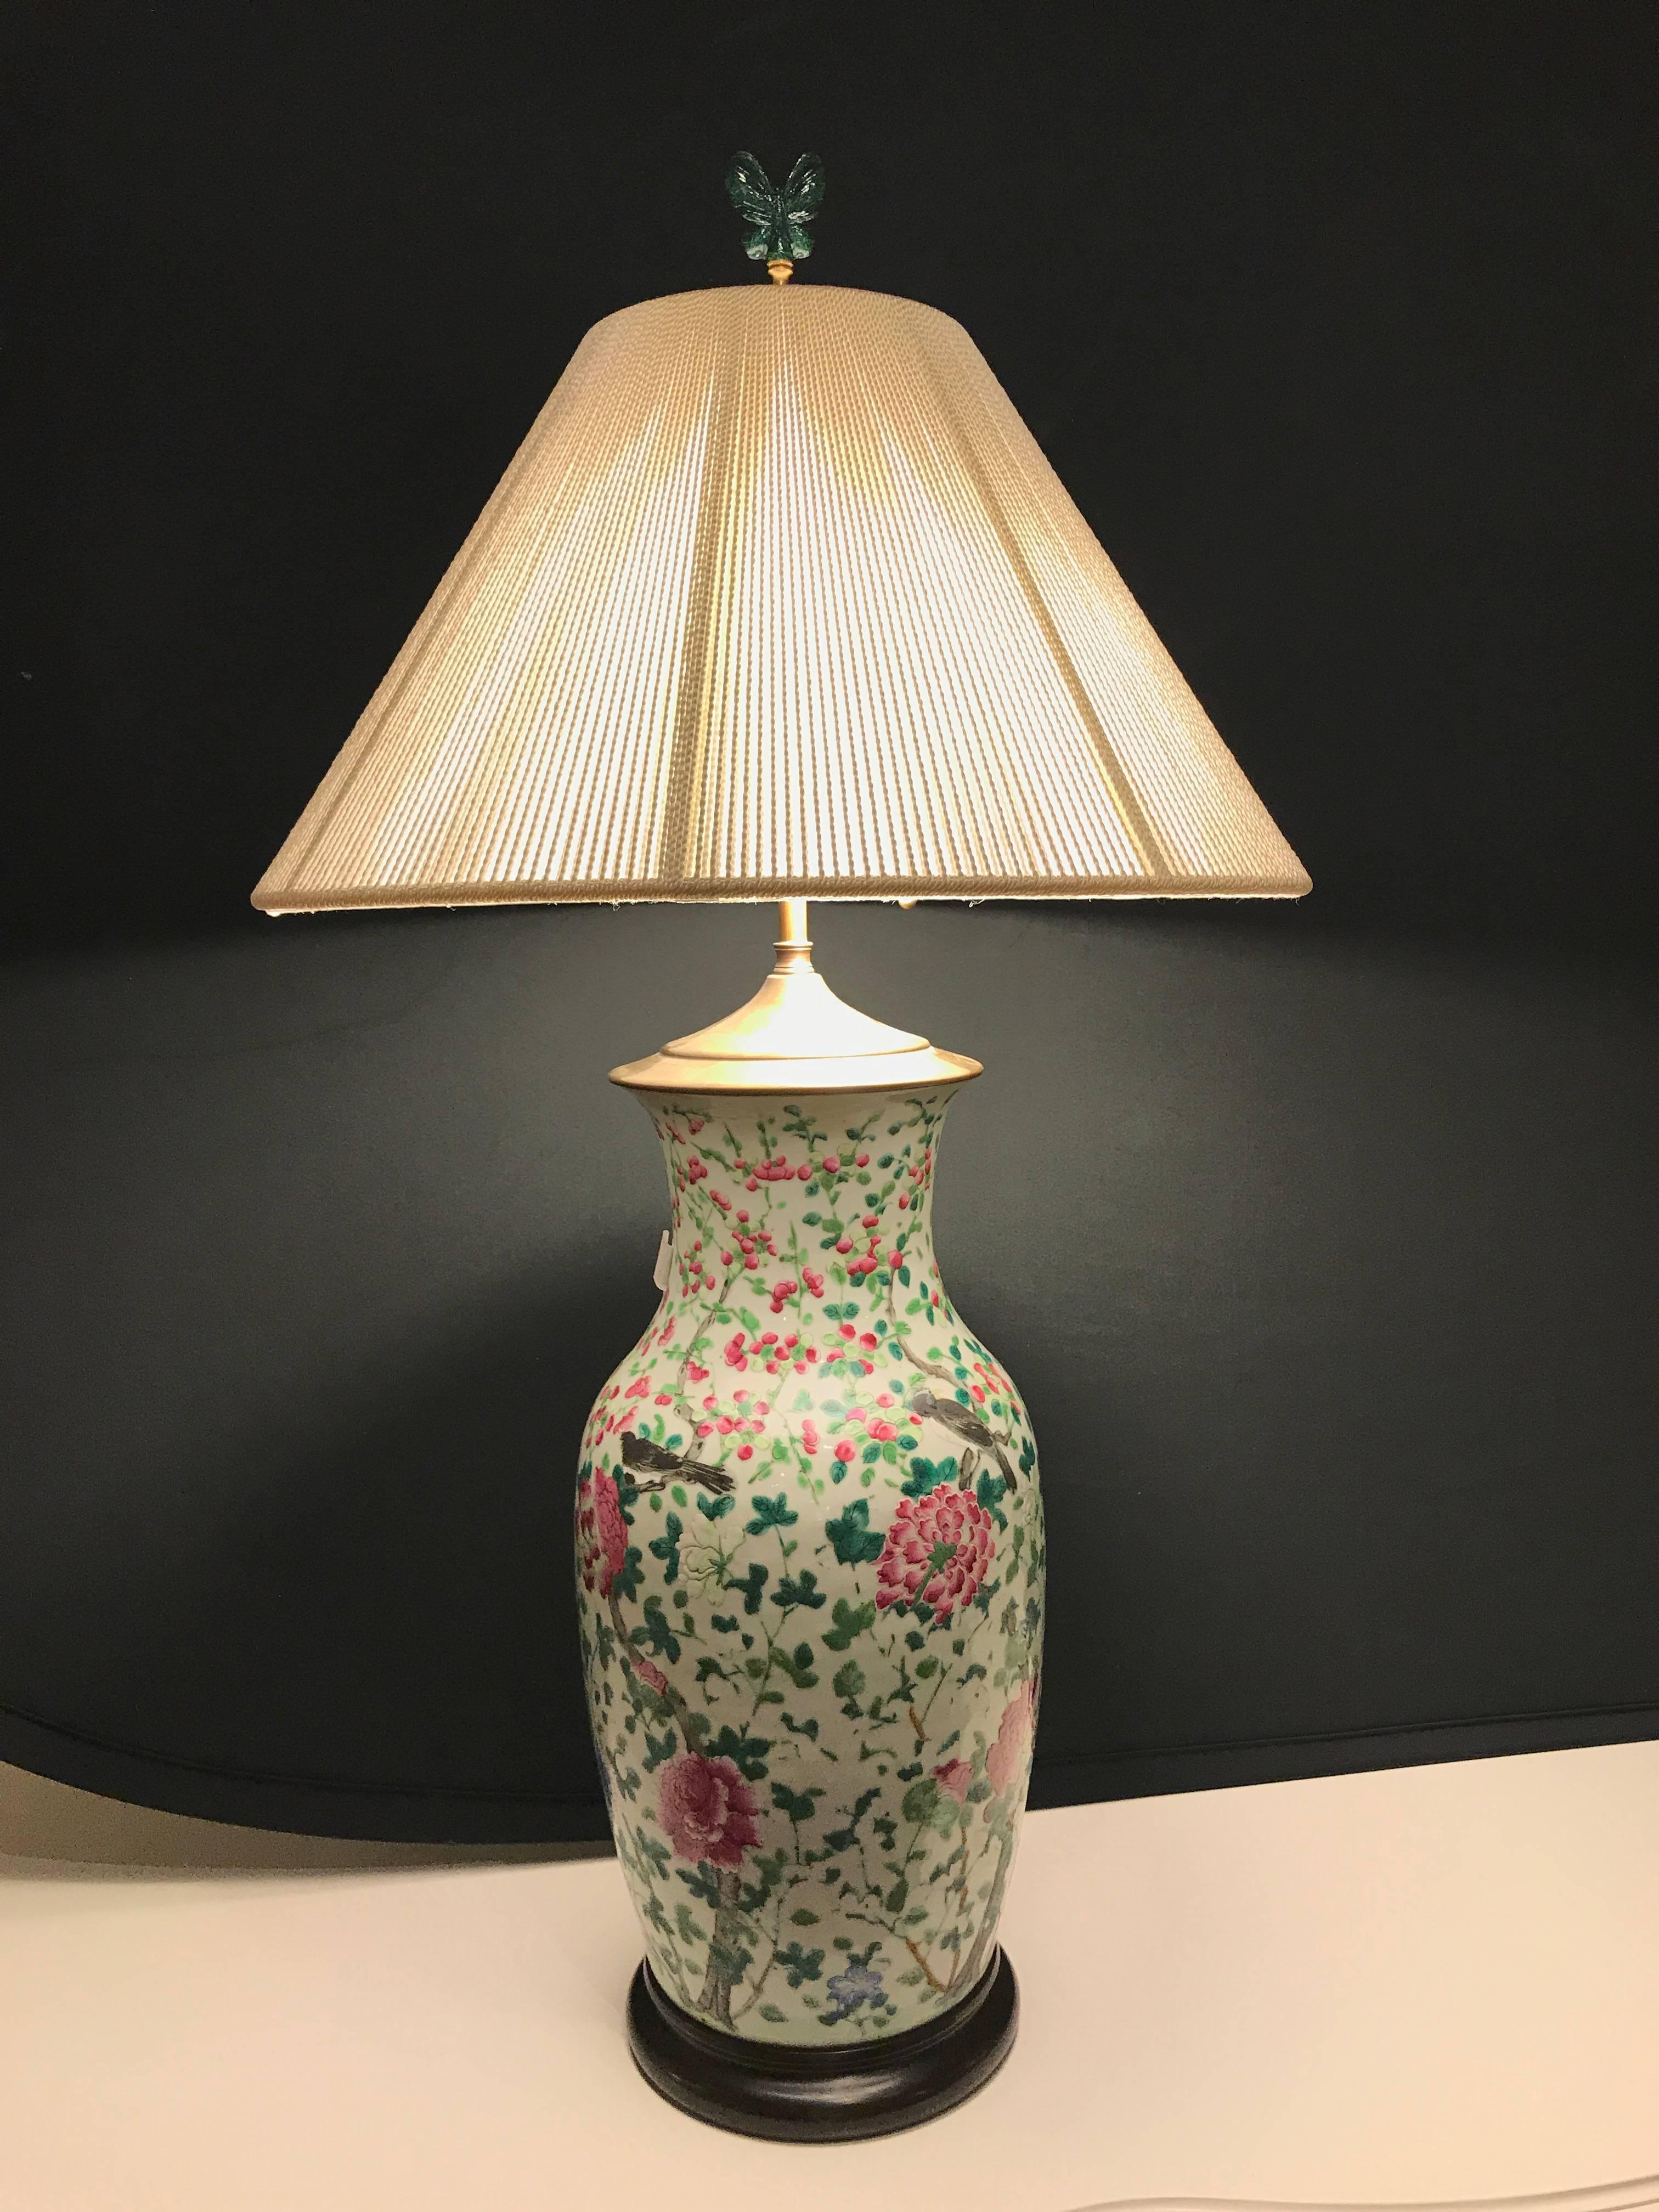 A Chinese large jar decorated with bird and roses mounted as a lamp. A fine and large Mid-Century porcelain ginger jar with paintings.